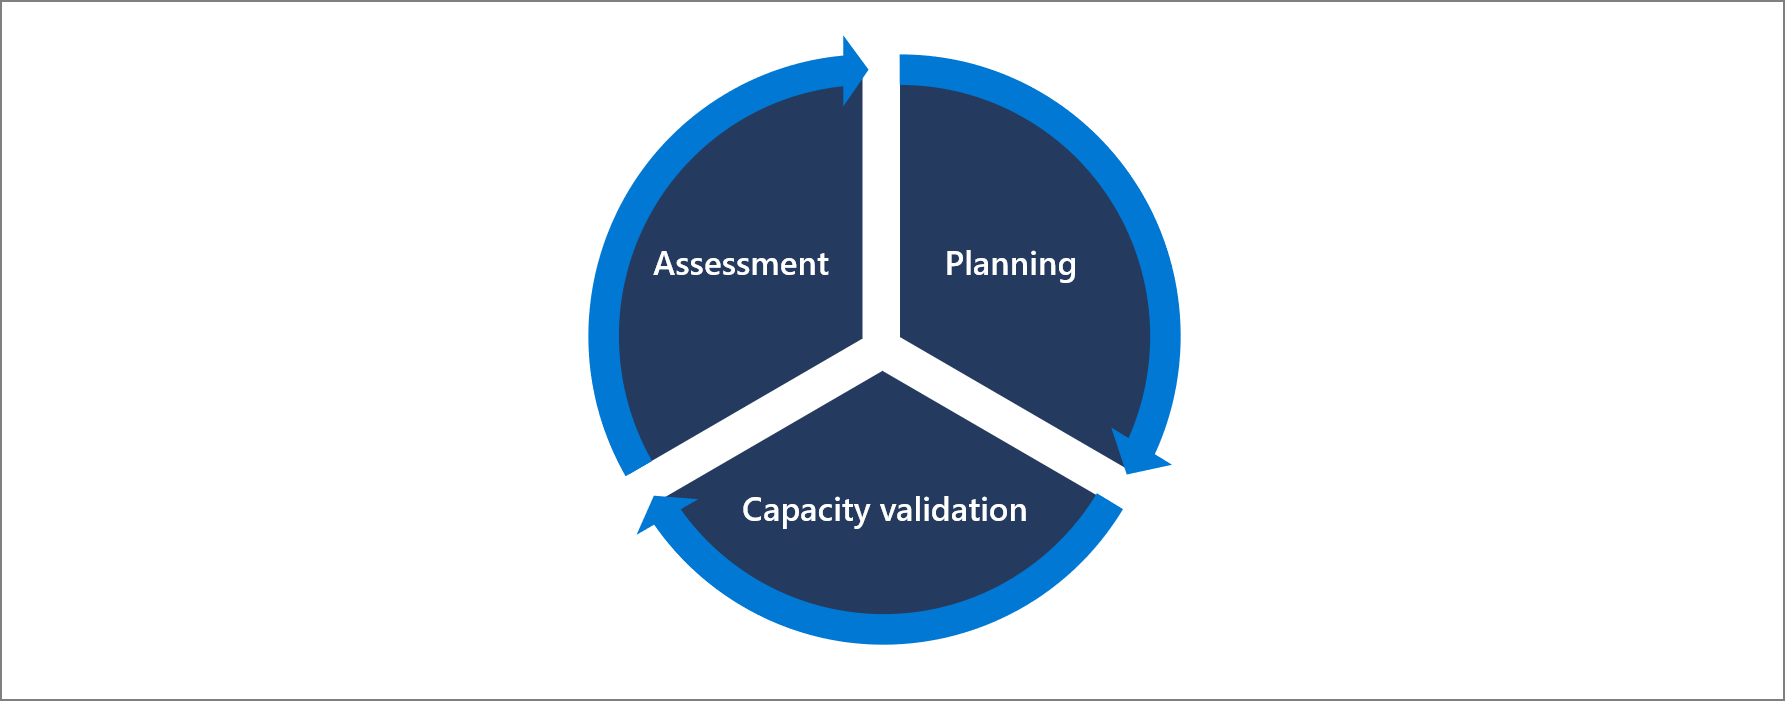 A diagram of the BCM lifecycle - assessment, planning, and capacity validation.